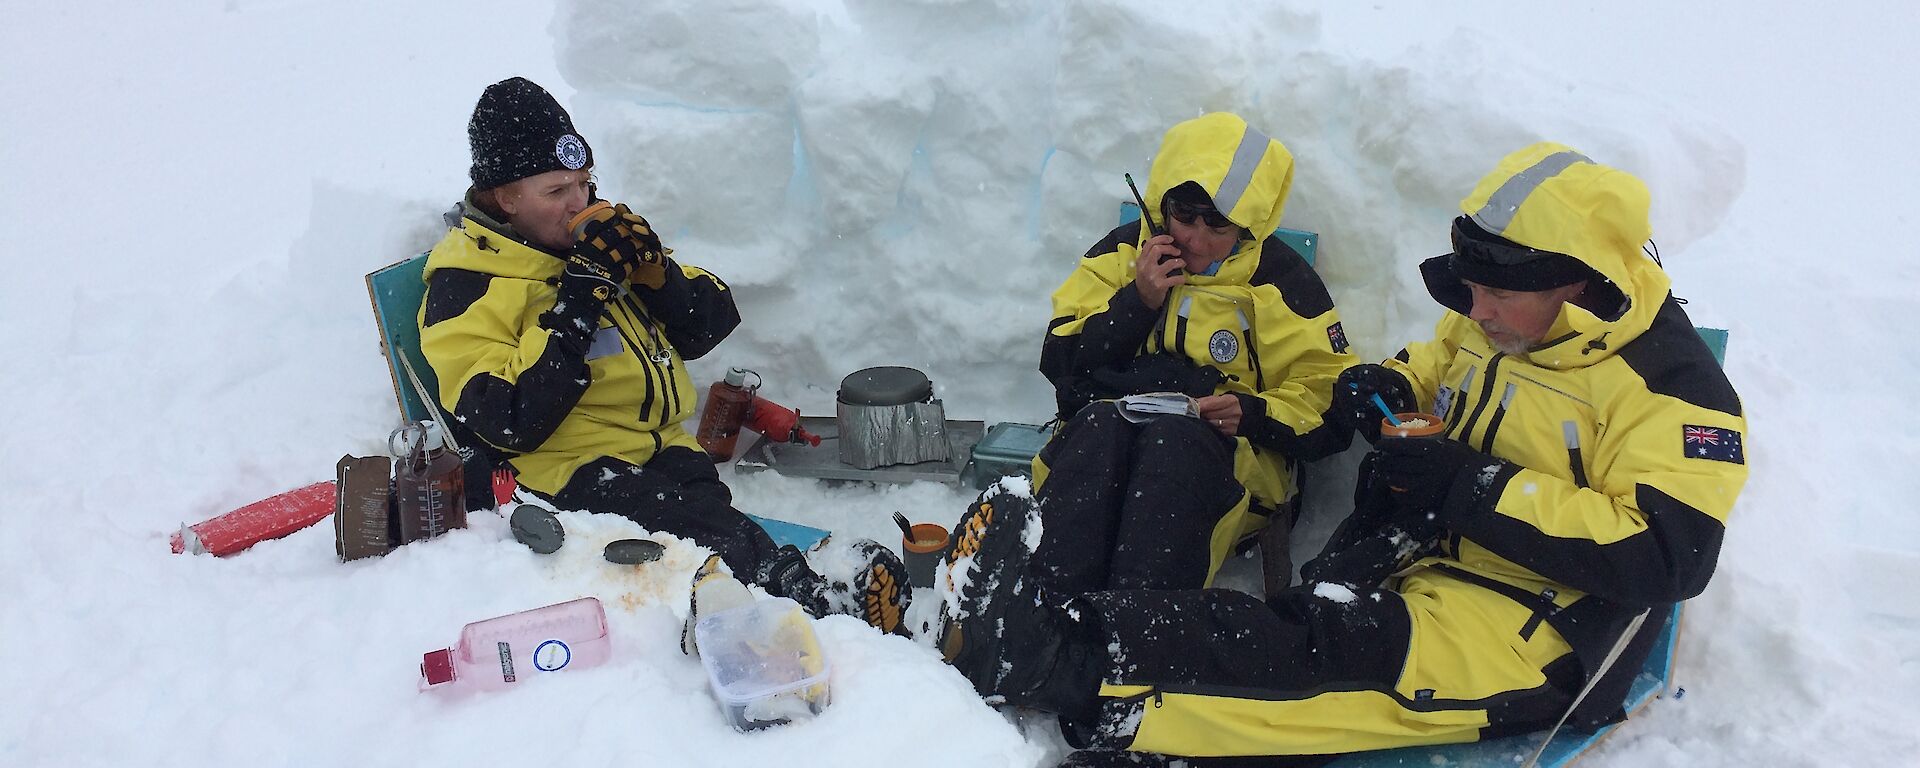 Three expeditioners sitting in a dug out snow hollow eating from mugs with middle expeditioner on the radio reading from a notebook